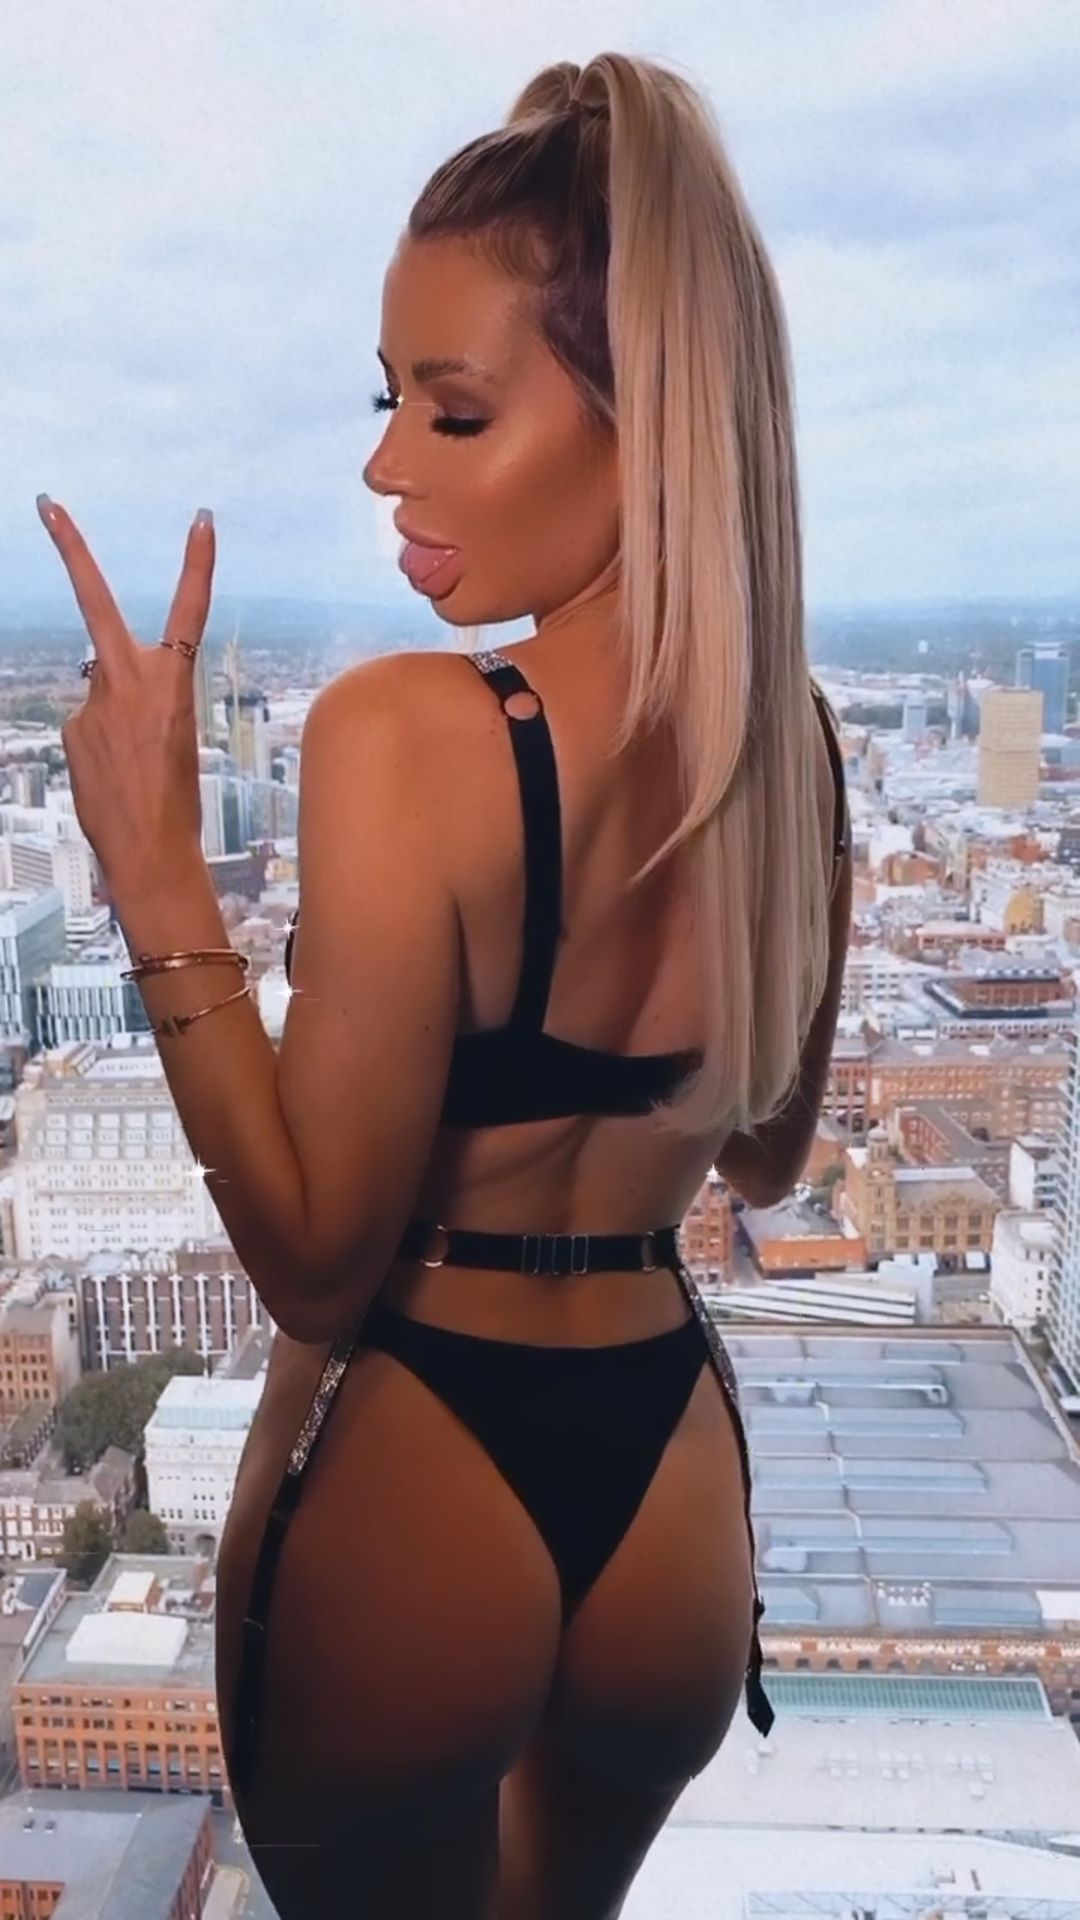 Olivia Attwood flashes her bottom as she gets a bum lift for upcoming hen do to ‘keep it peachy’